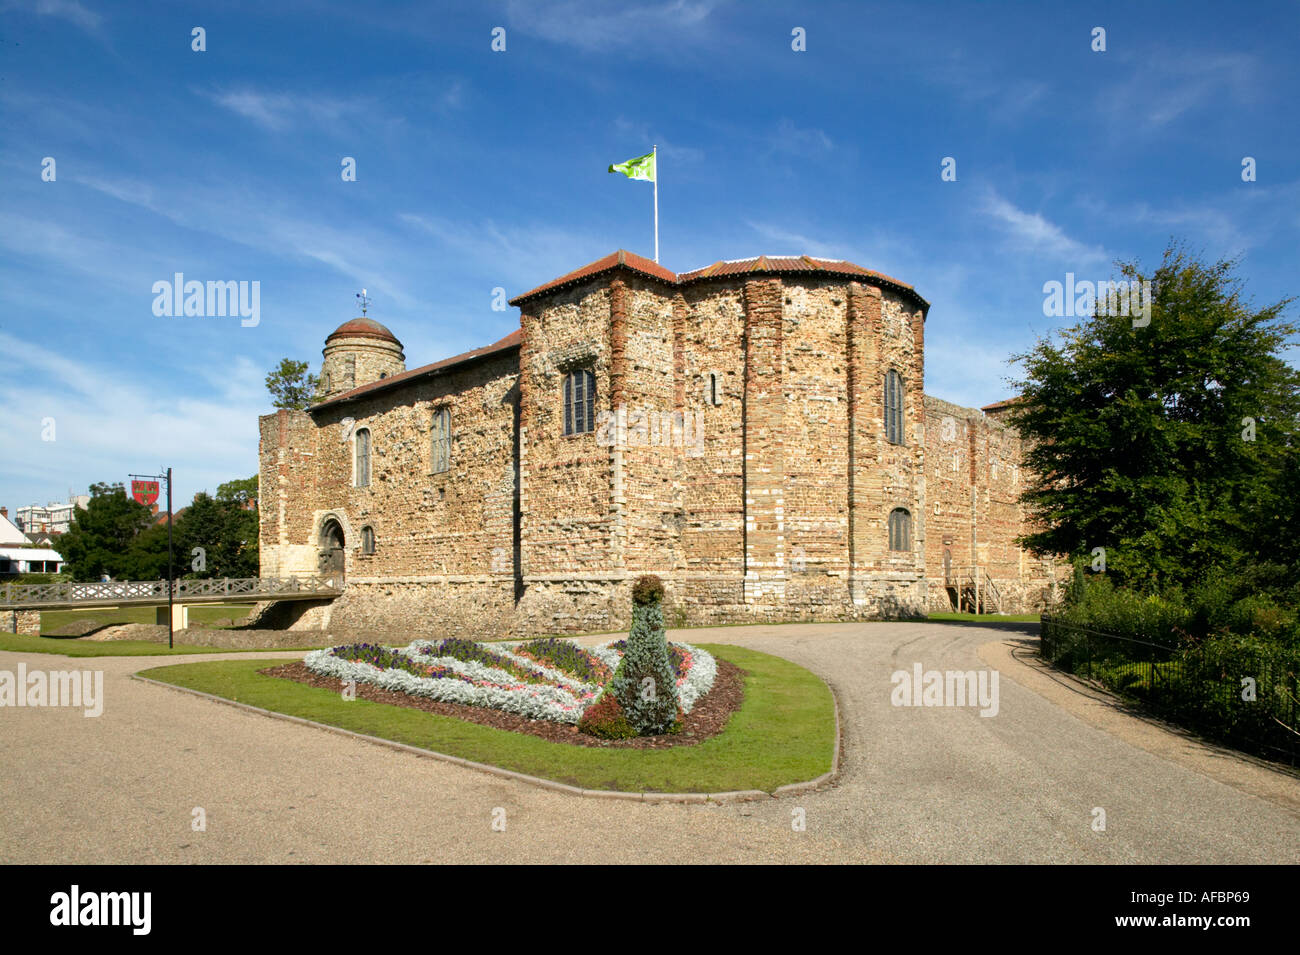 England Essex Colchester Castle and Decorative Peacock Flower Bed Stock Photo